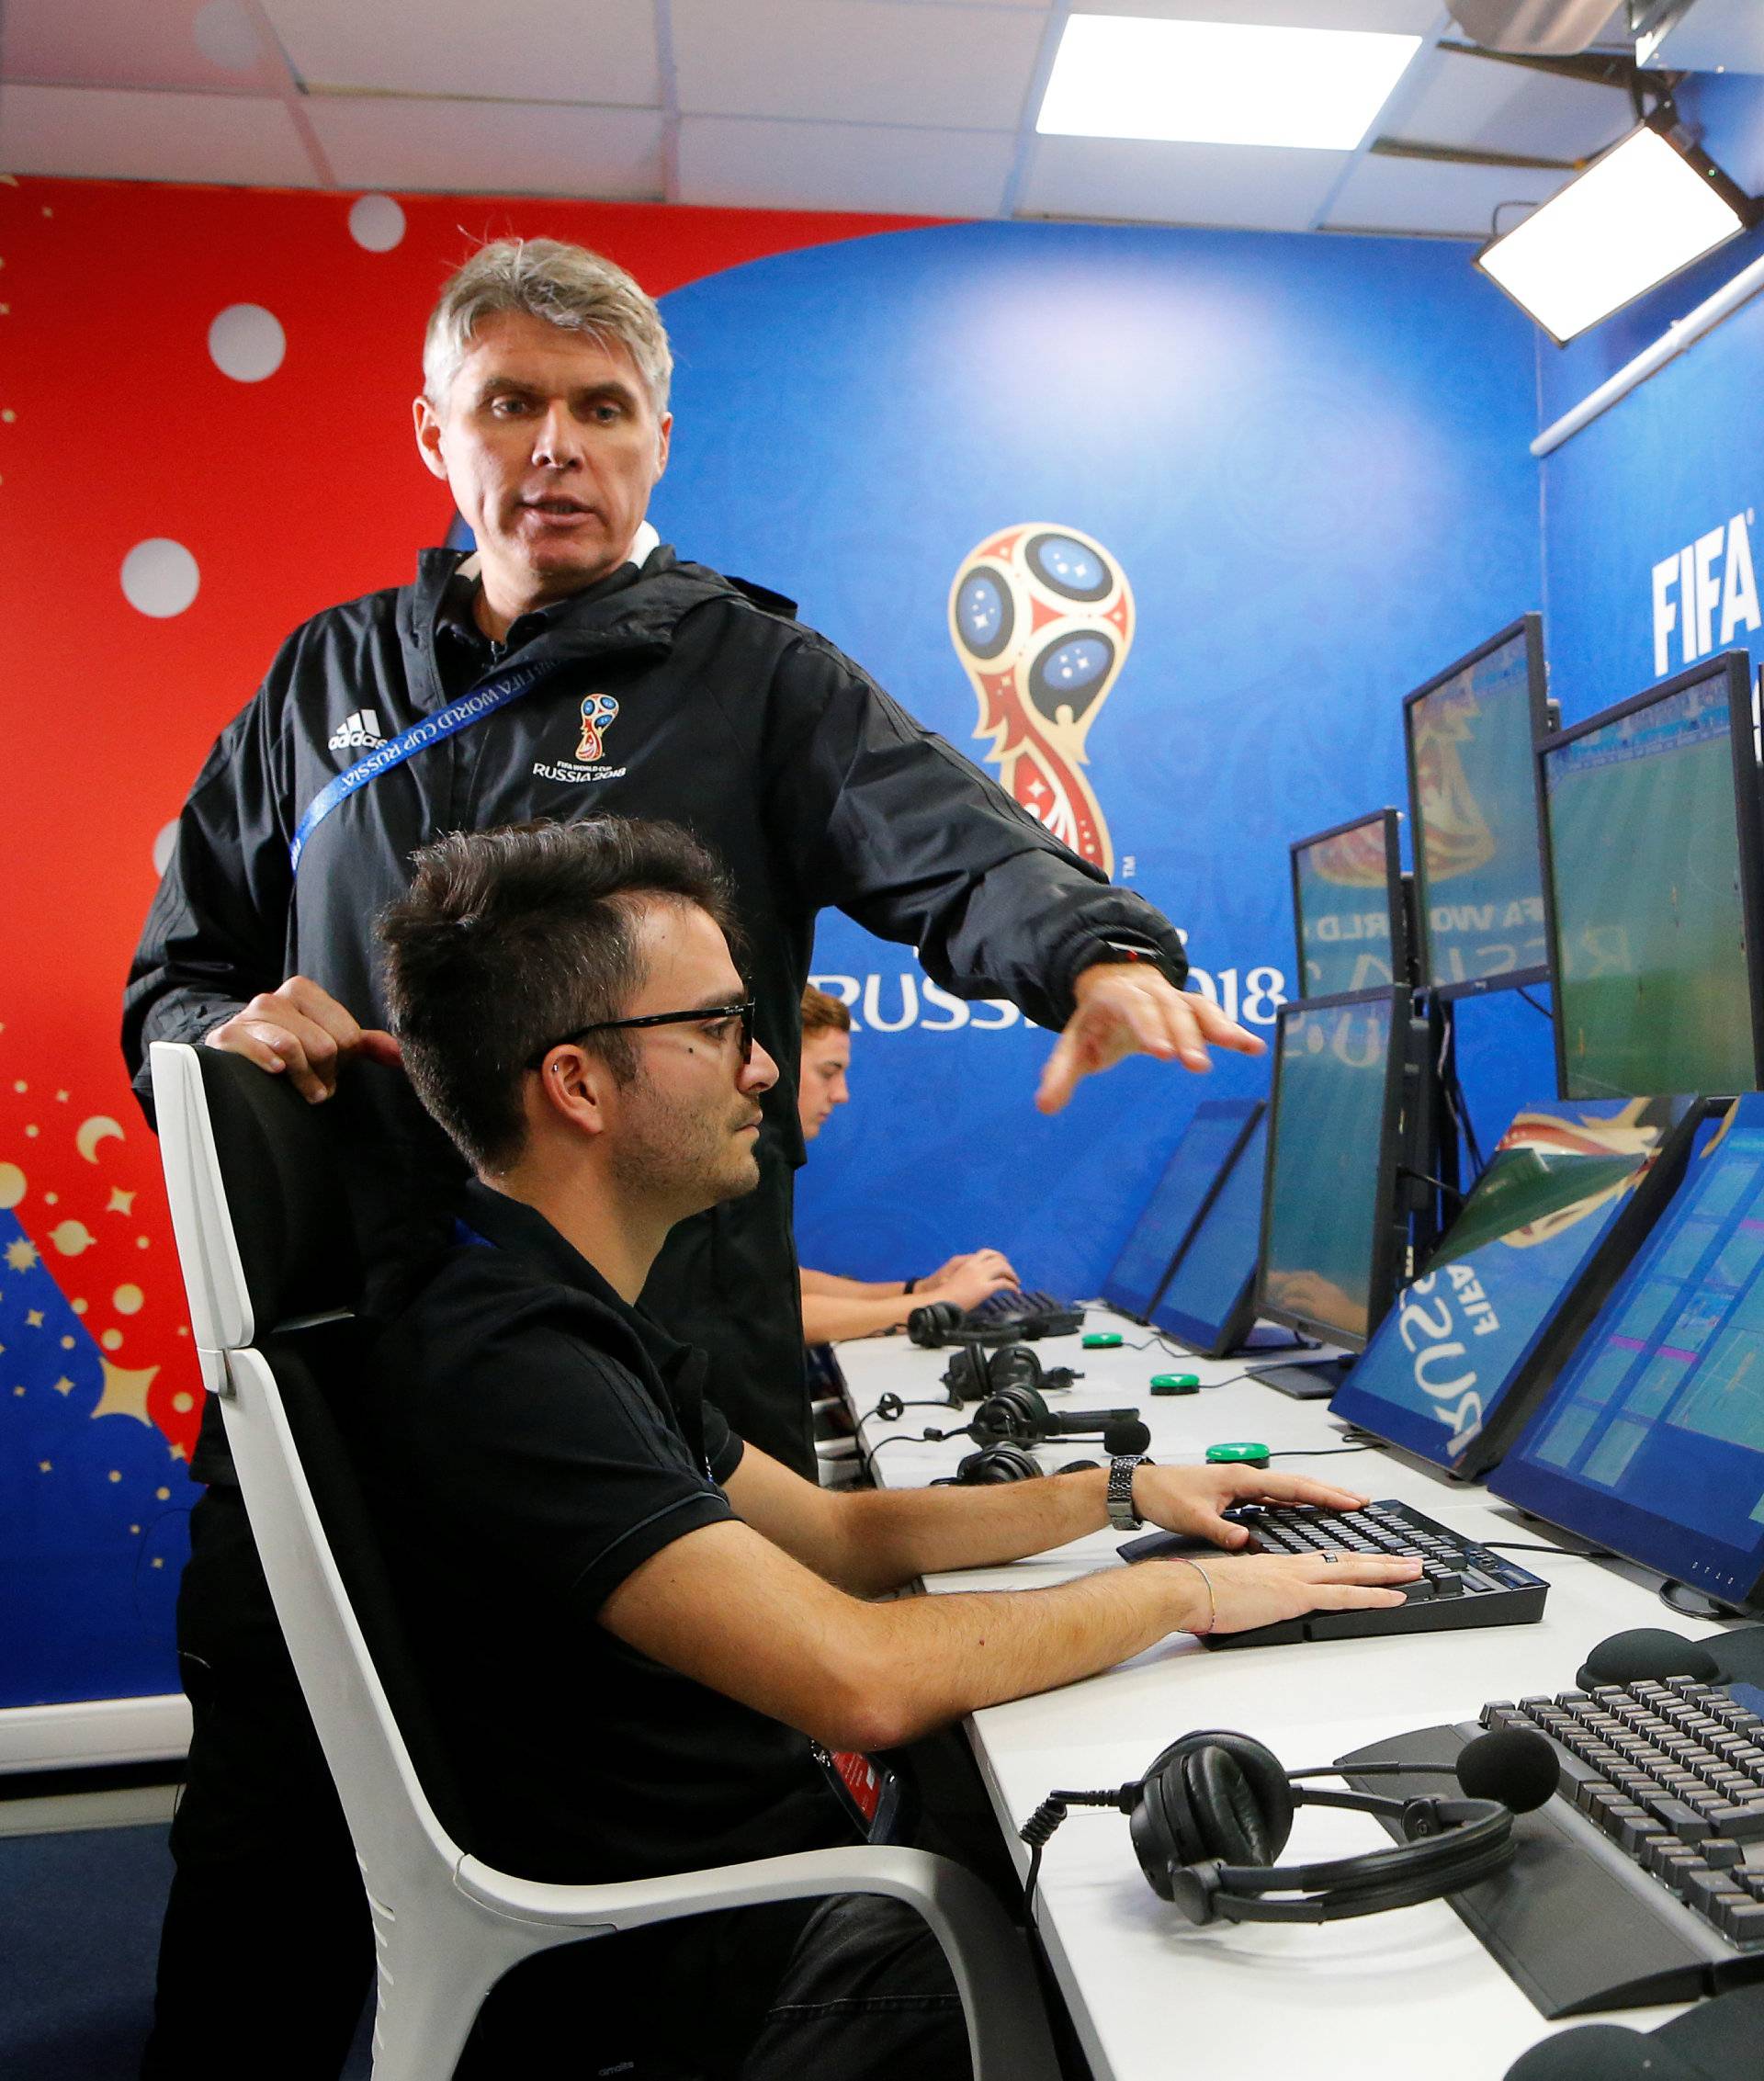 FIFA VAR Refereeing Project Leader Rosetti demonstrates a video operation room in Moscow